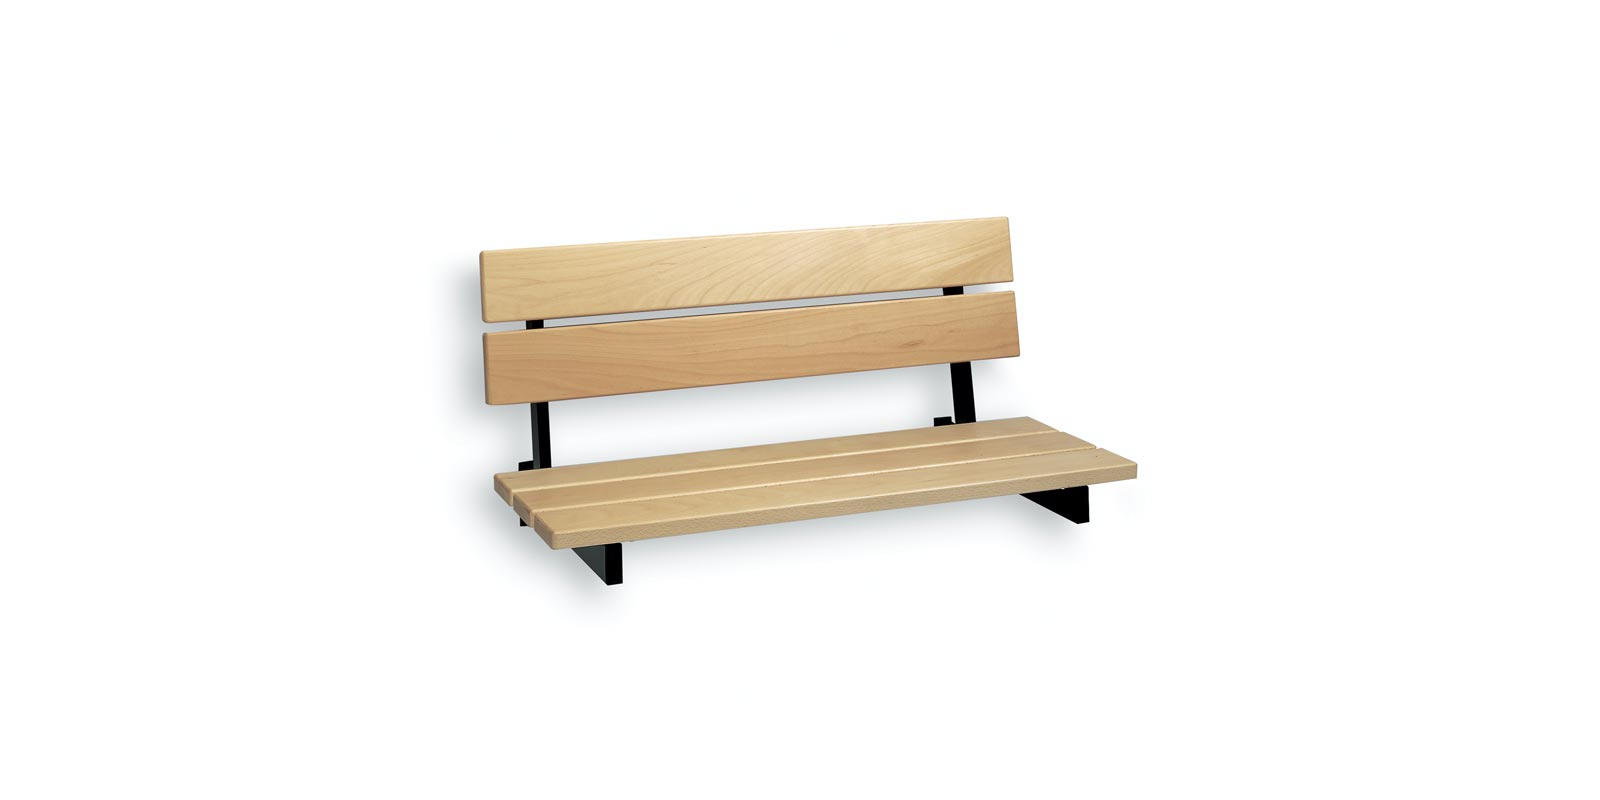 Wall bench with three bench slats and back rest - WHBA02